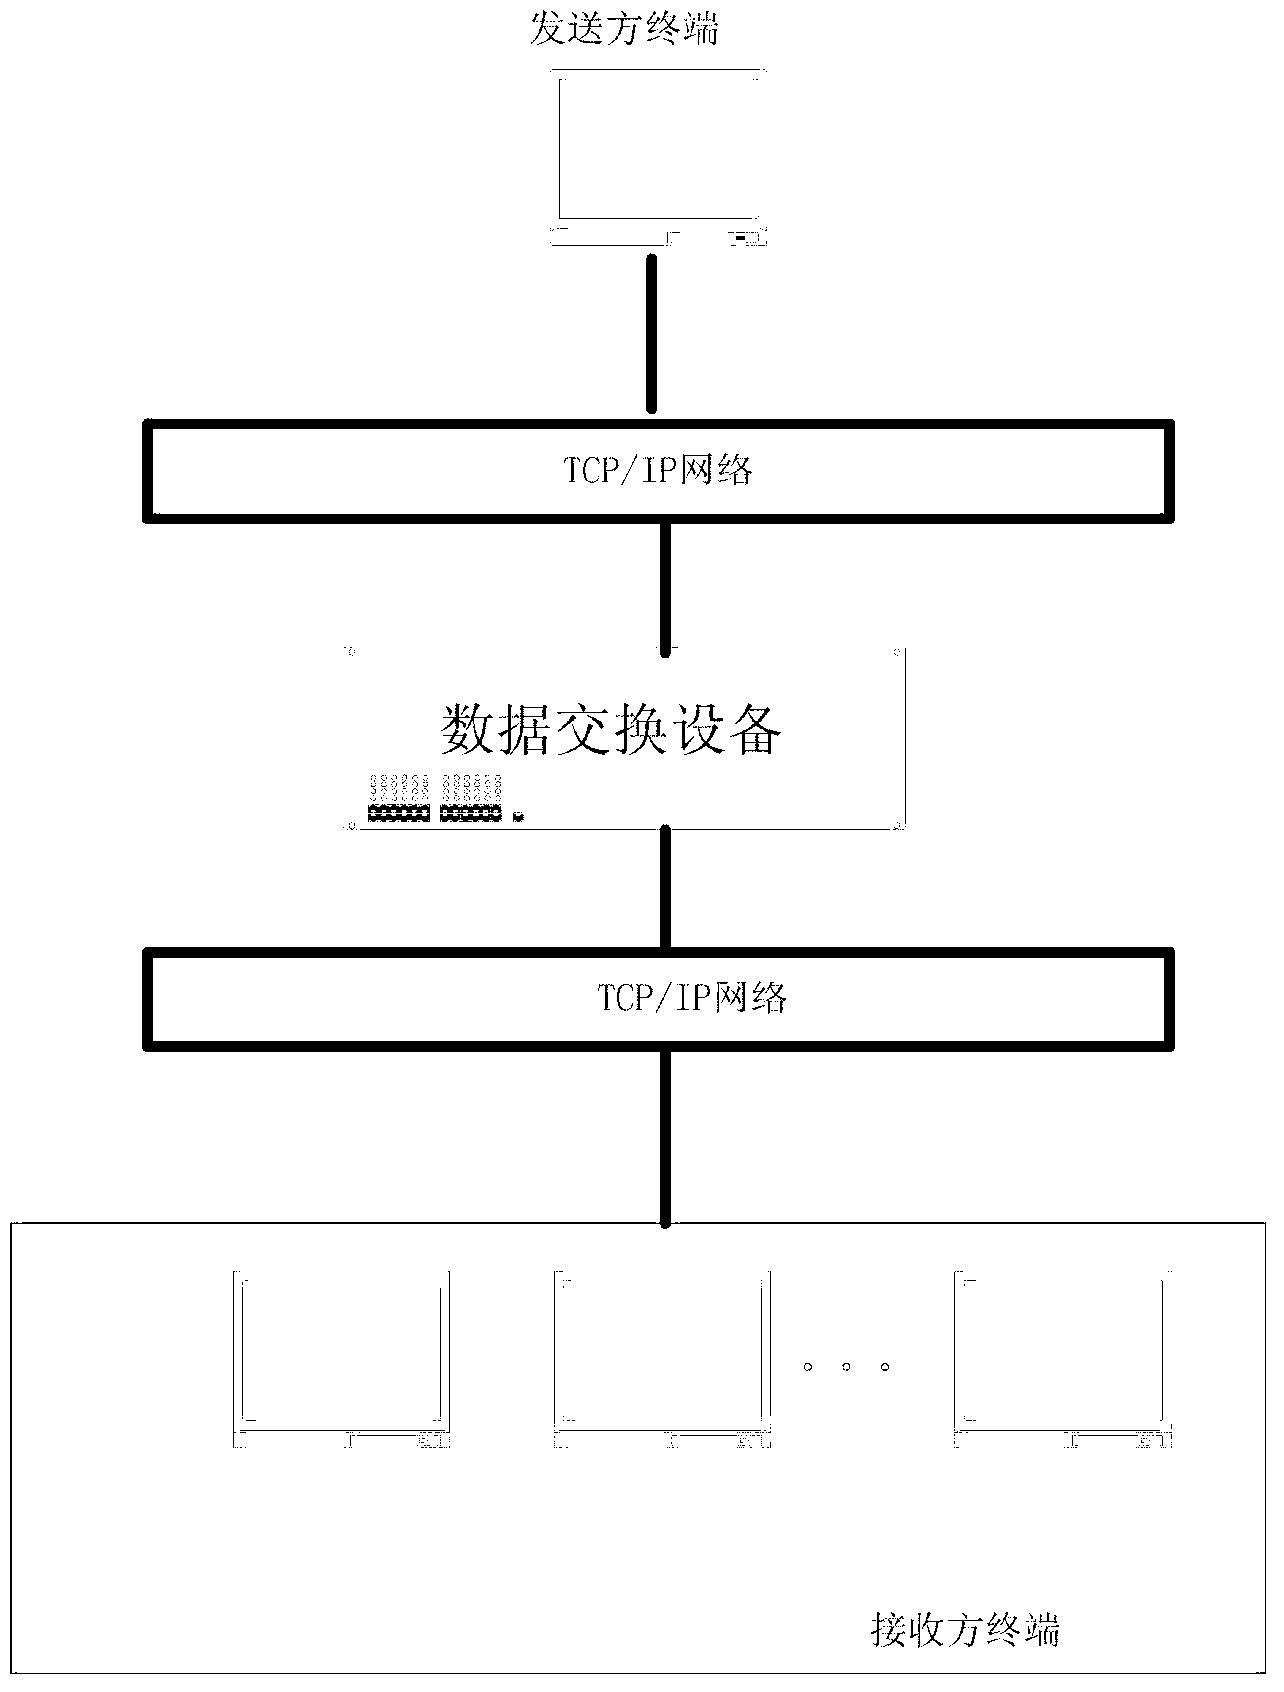 Method and device in video conference, multi-point control device and video conference system